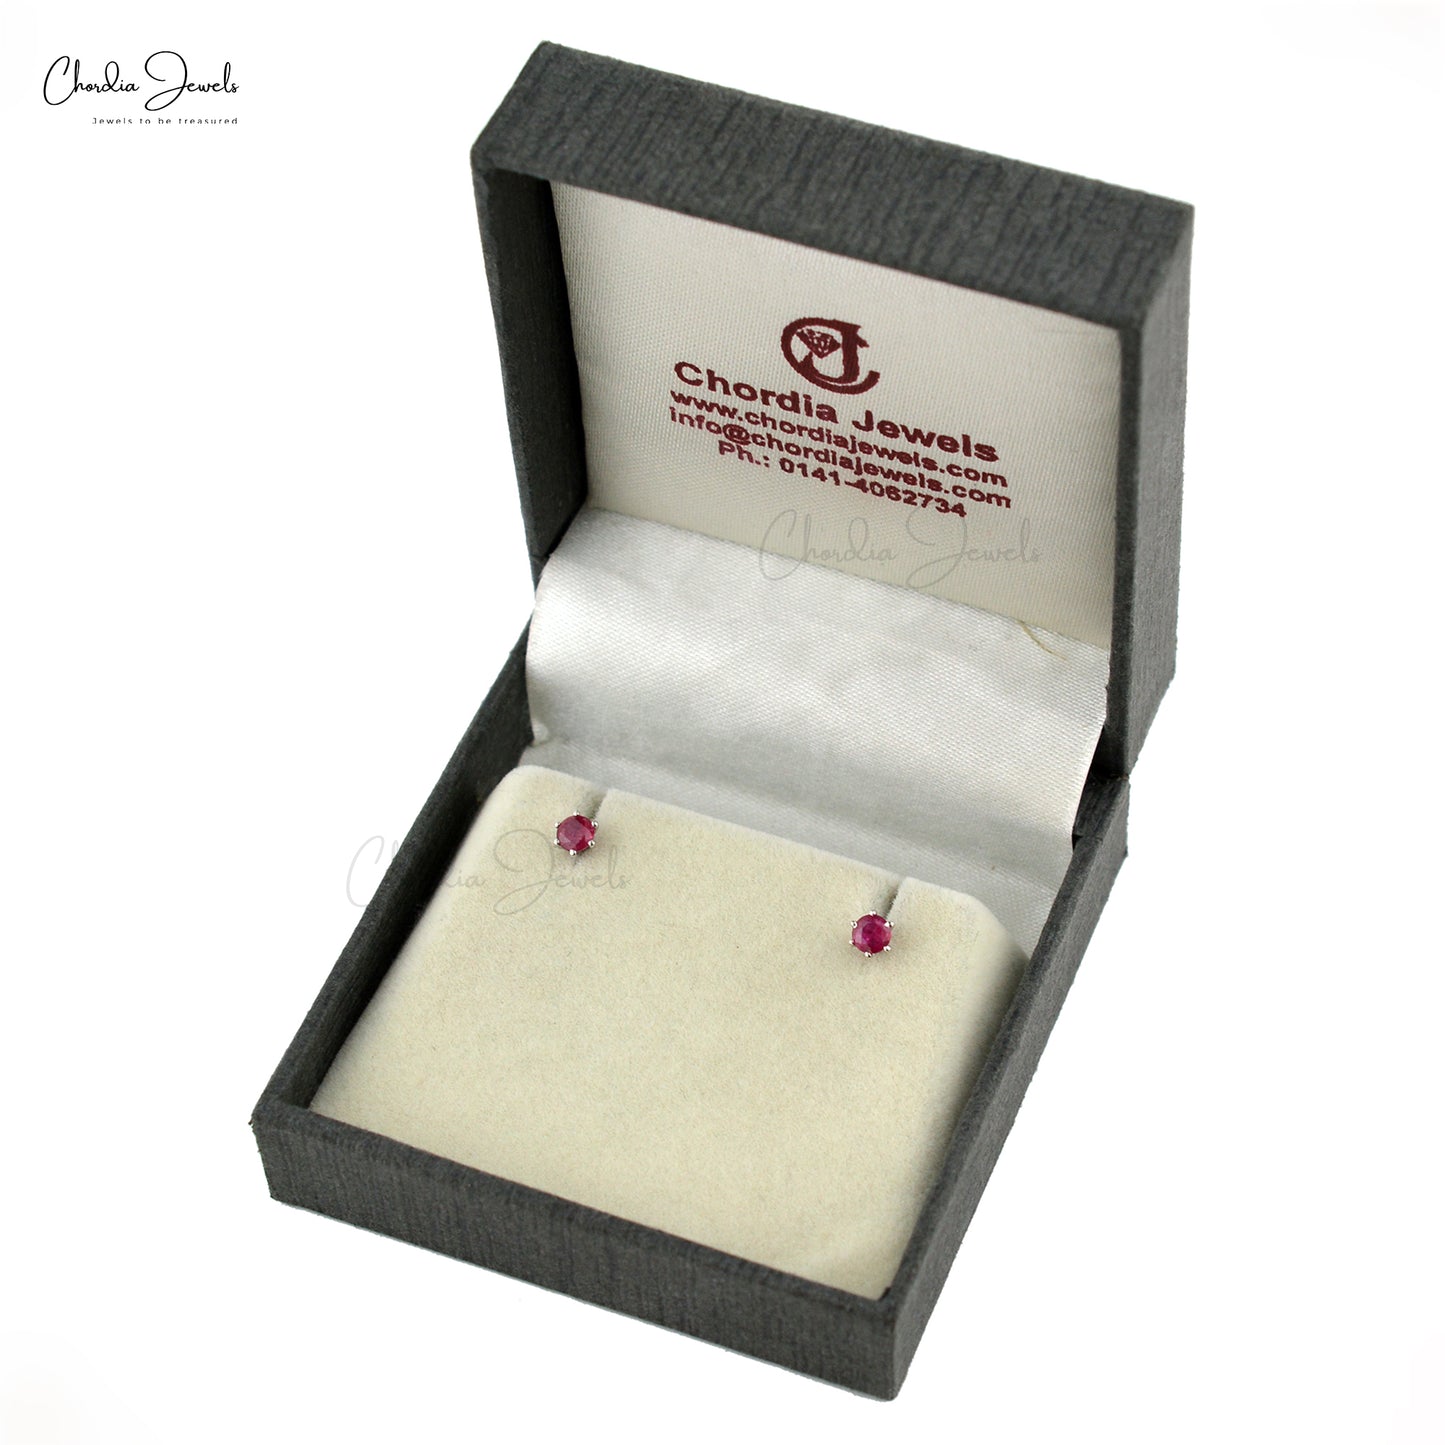 Load image into Gallery viewer, Hot Selling Jewelry Genuine Red Ruby Studs 925 Sterling Silver Round Cut Gemstone Stud Earrings At Offer Price
